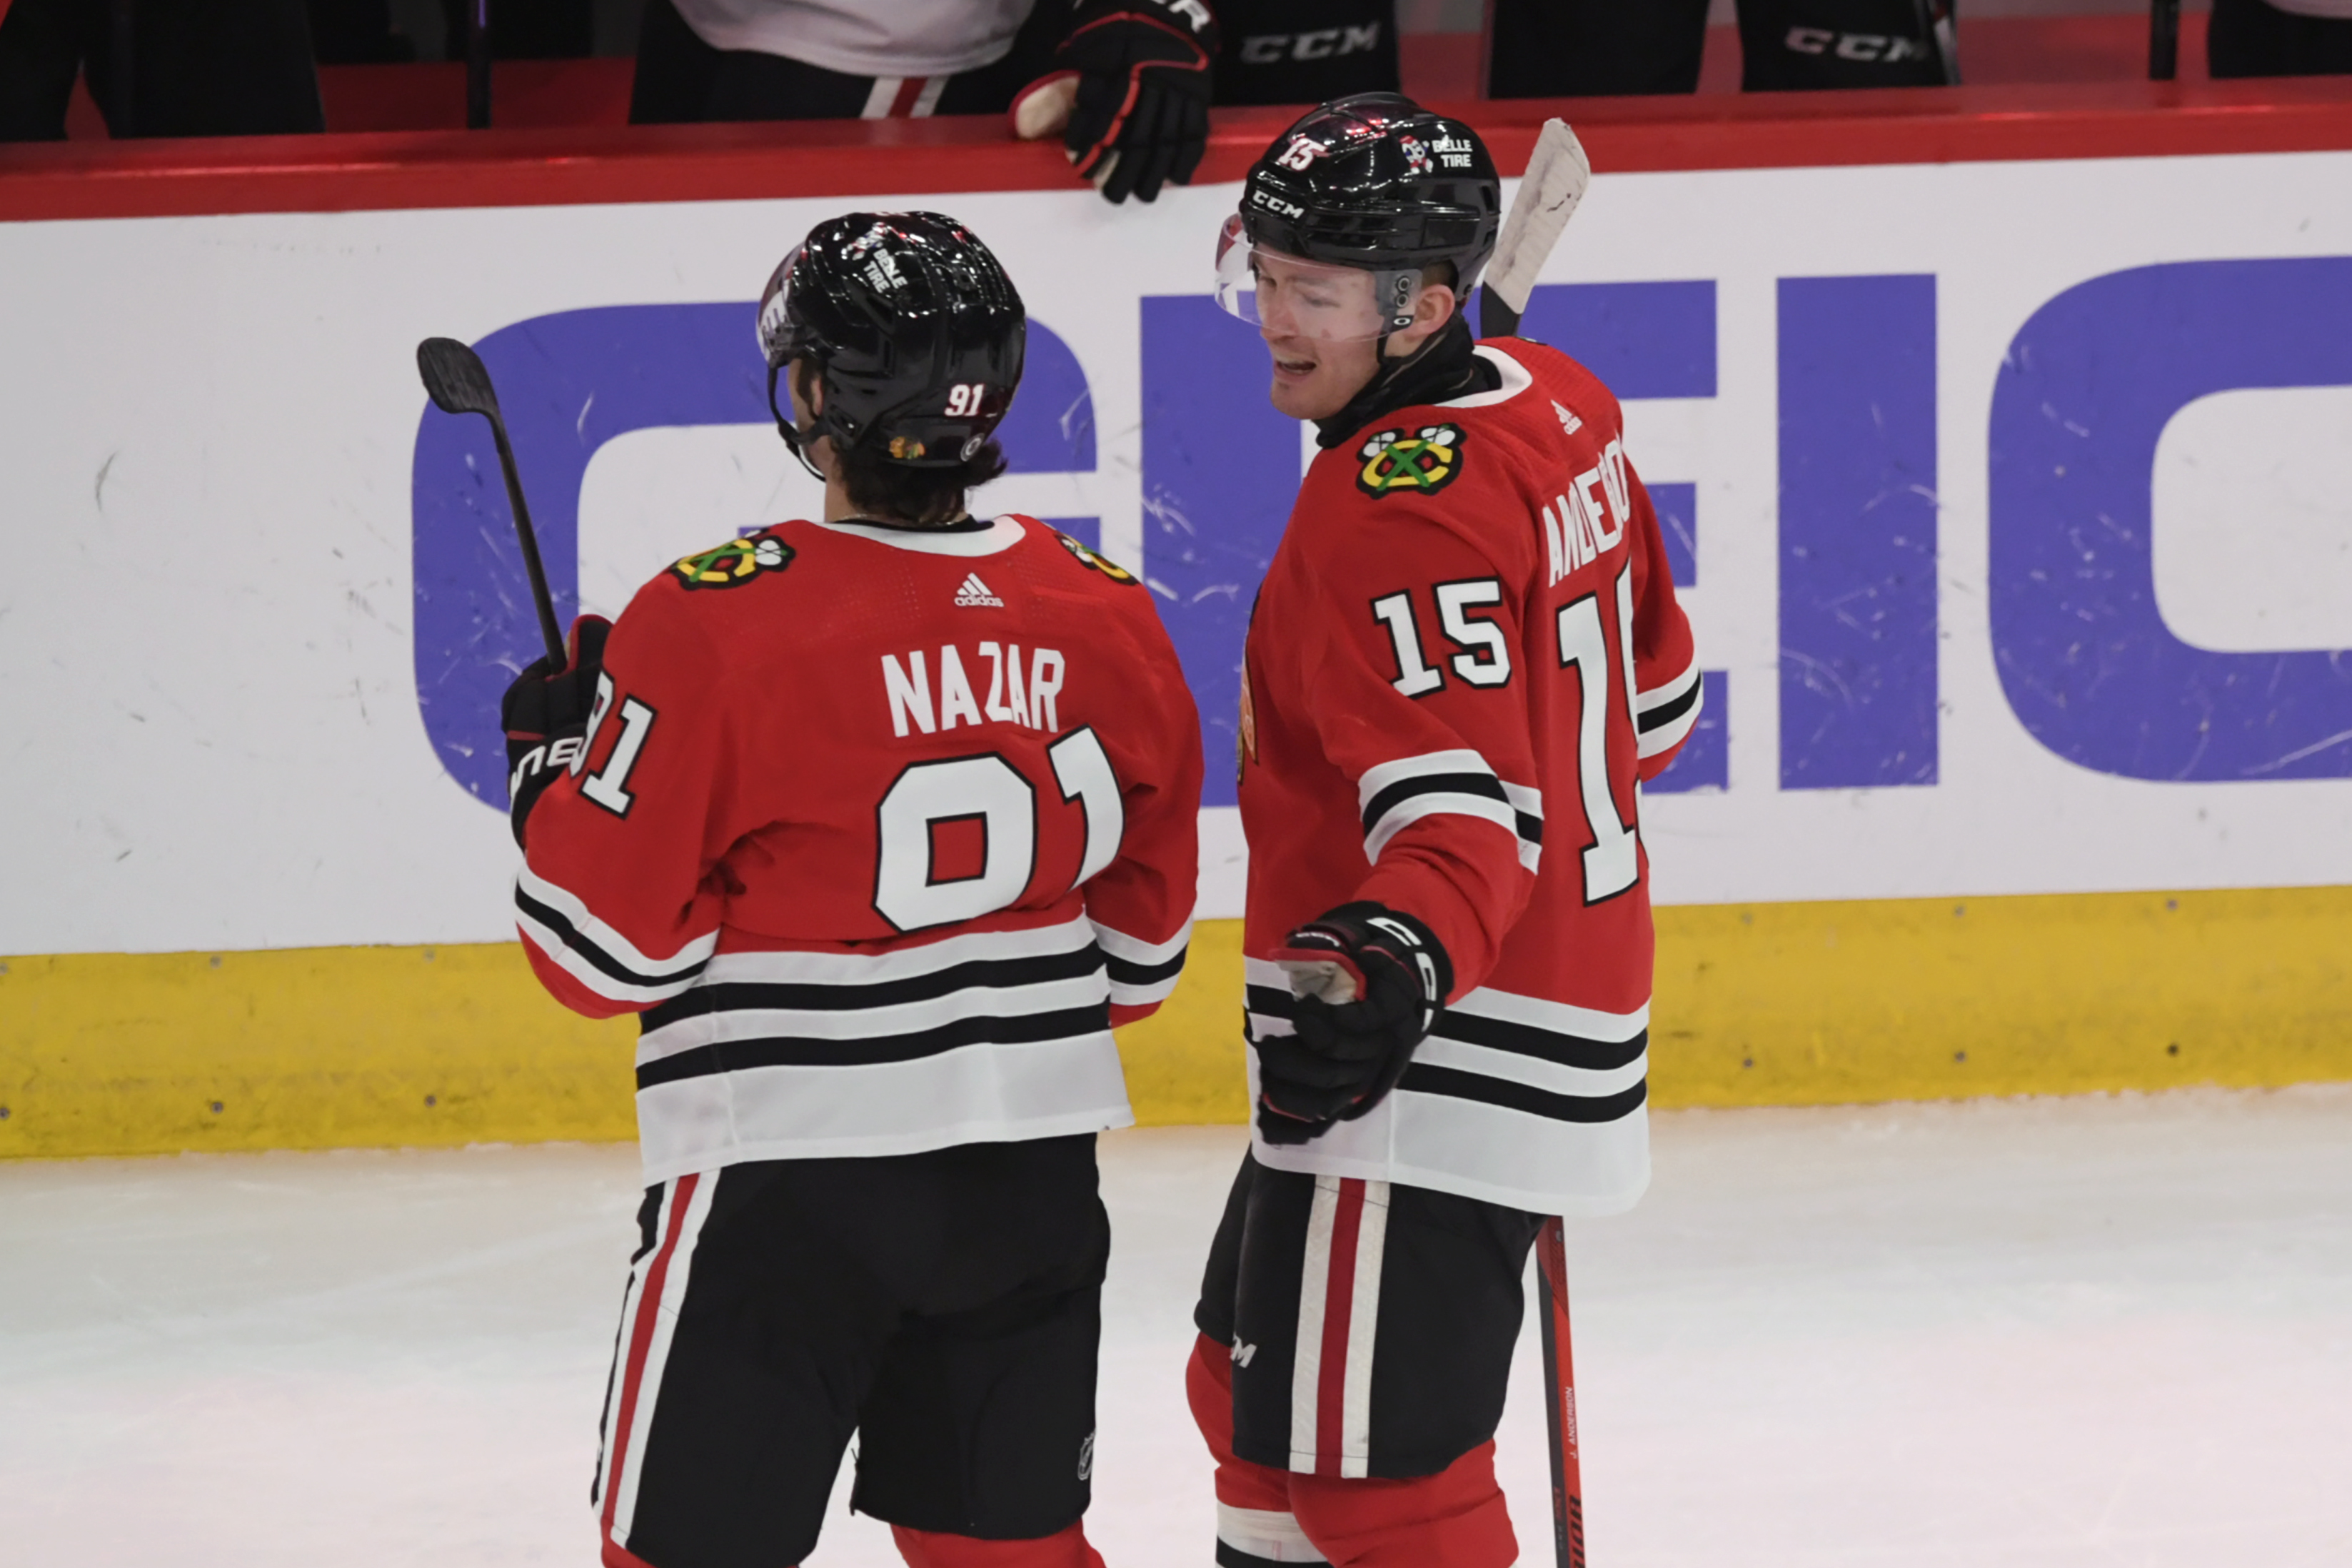 seth jarvis leads hurricanes past blackhawks 4-2 for 5th straight win